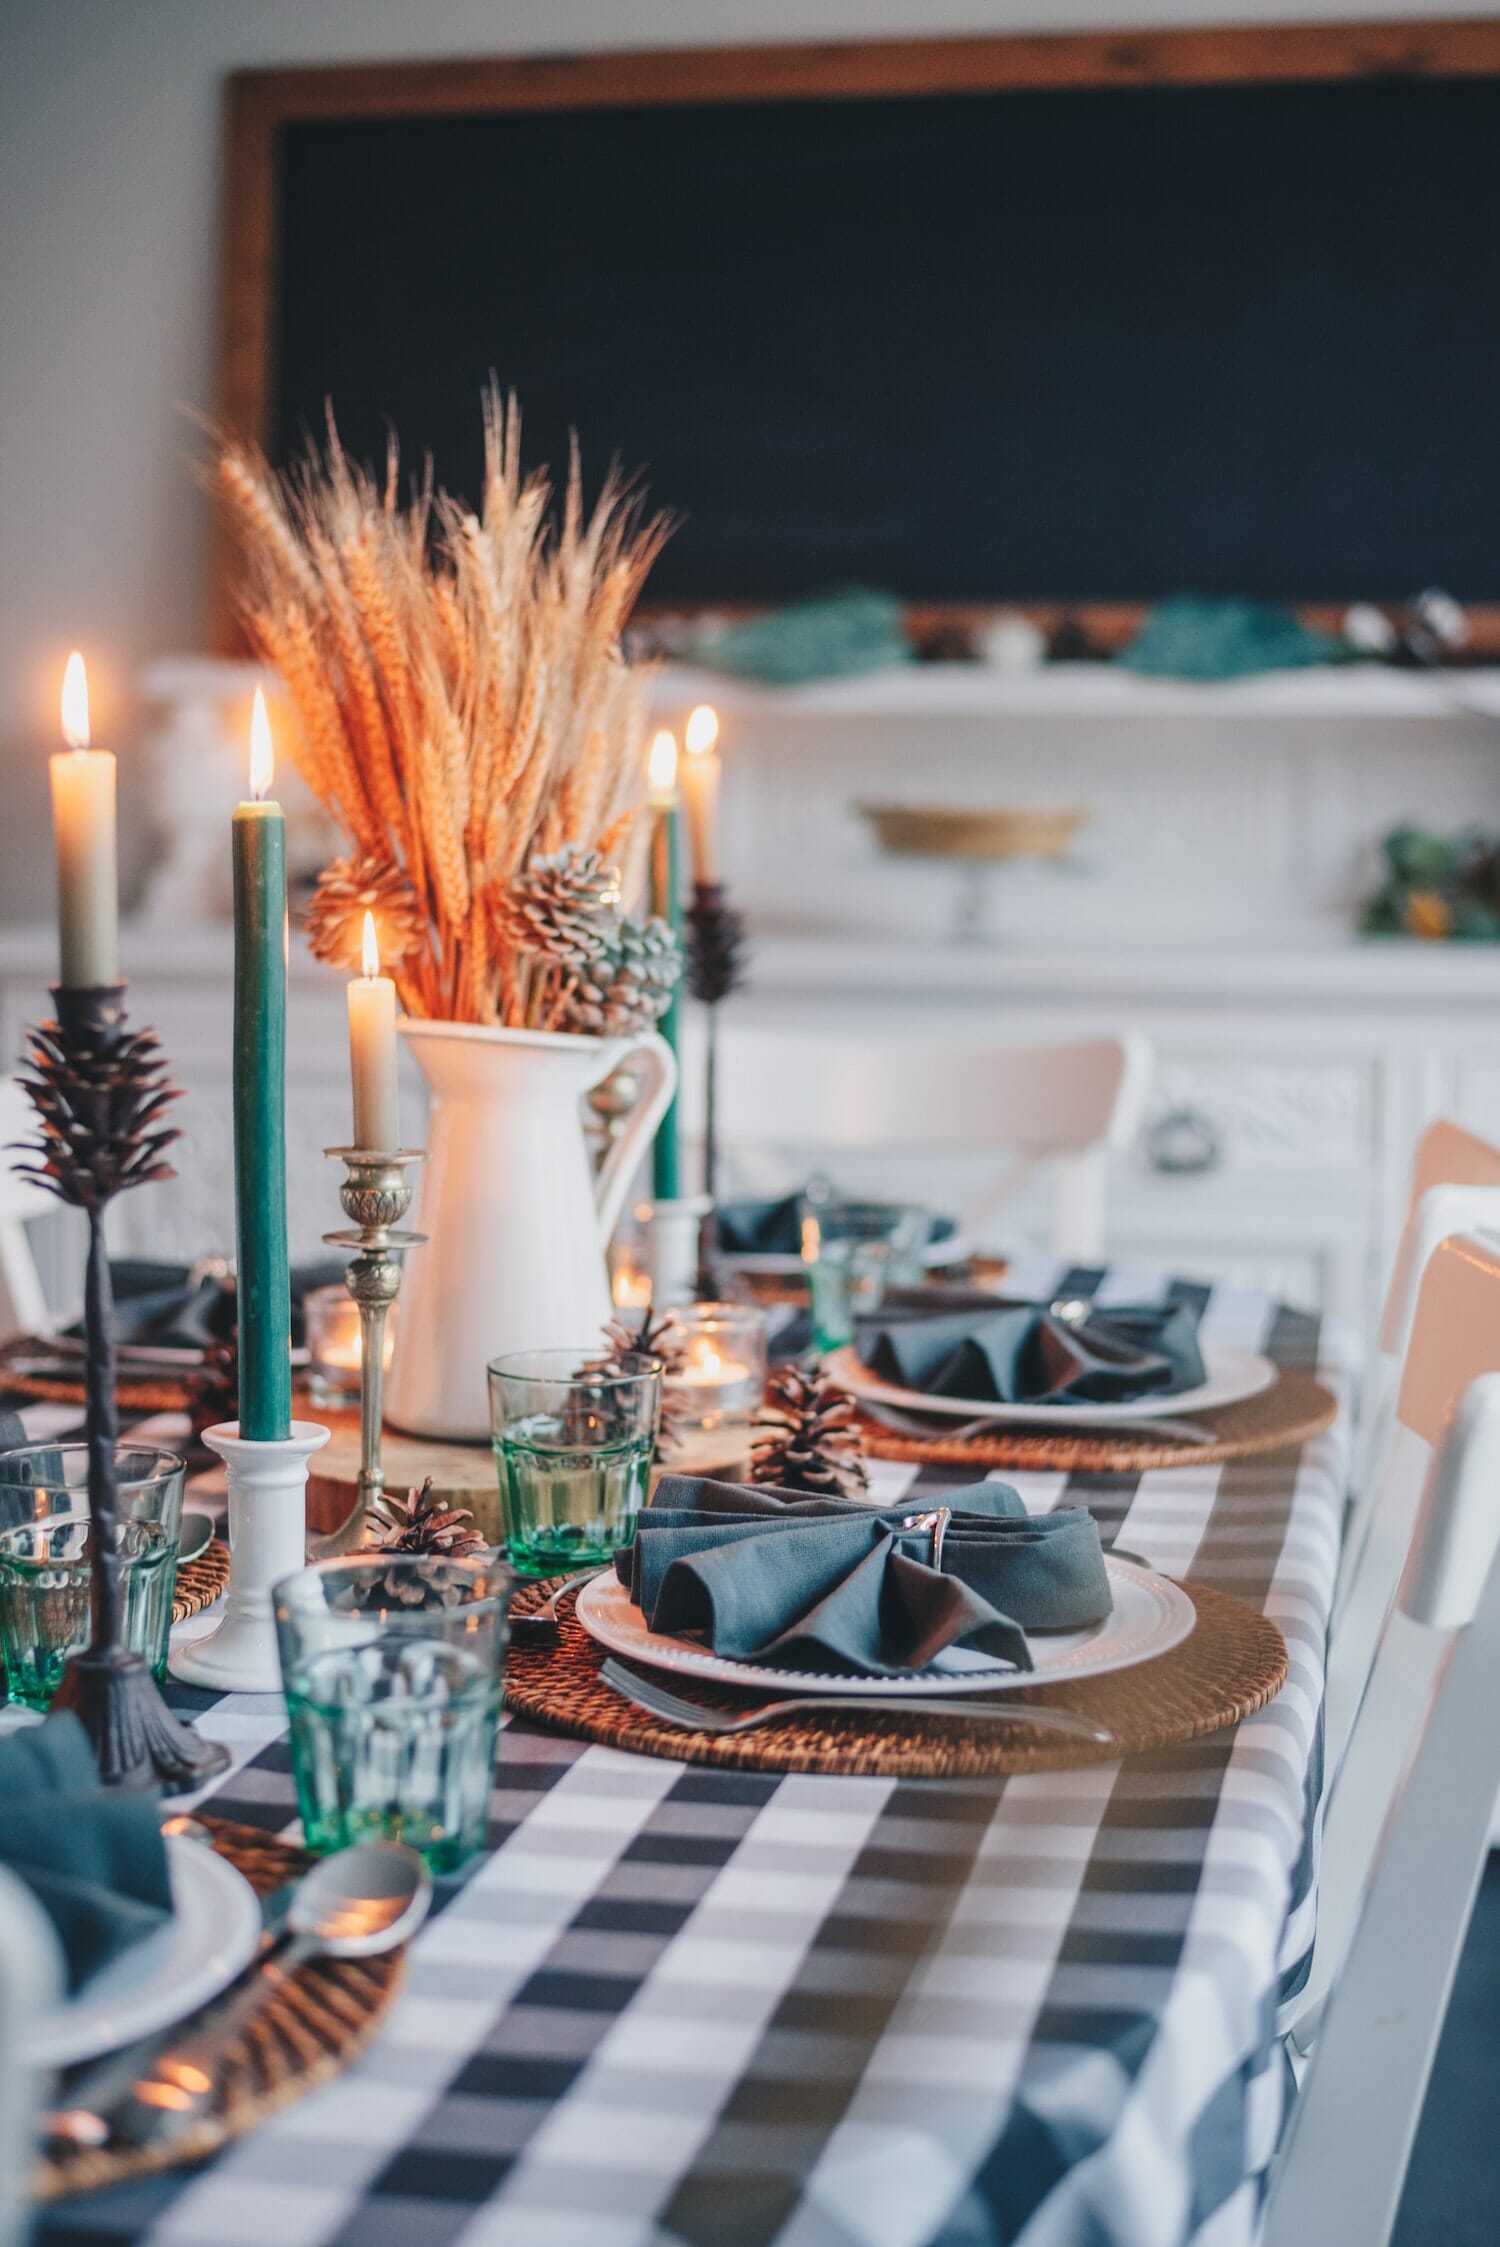 10 Fun Friendsgiving Theme Ideas That’ll Up Your Party Game